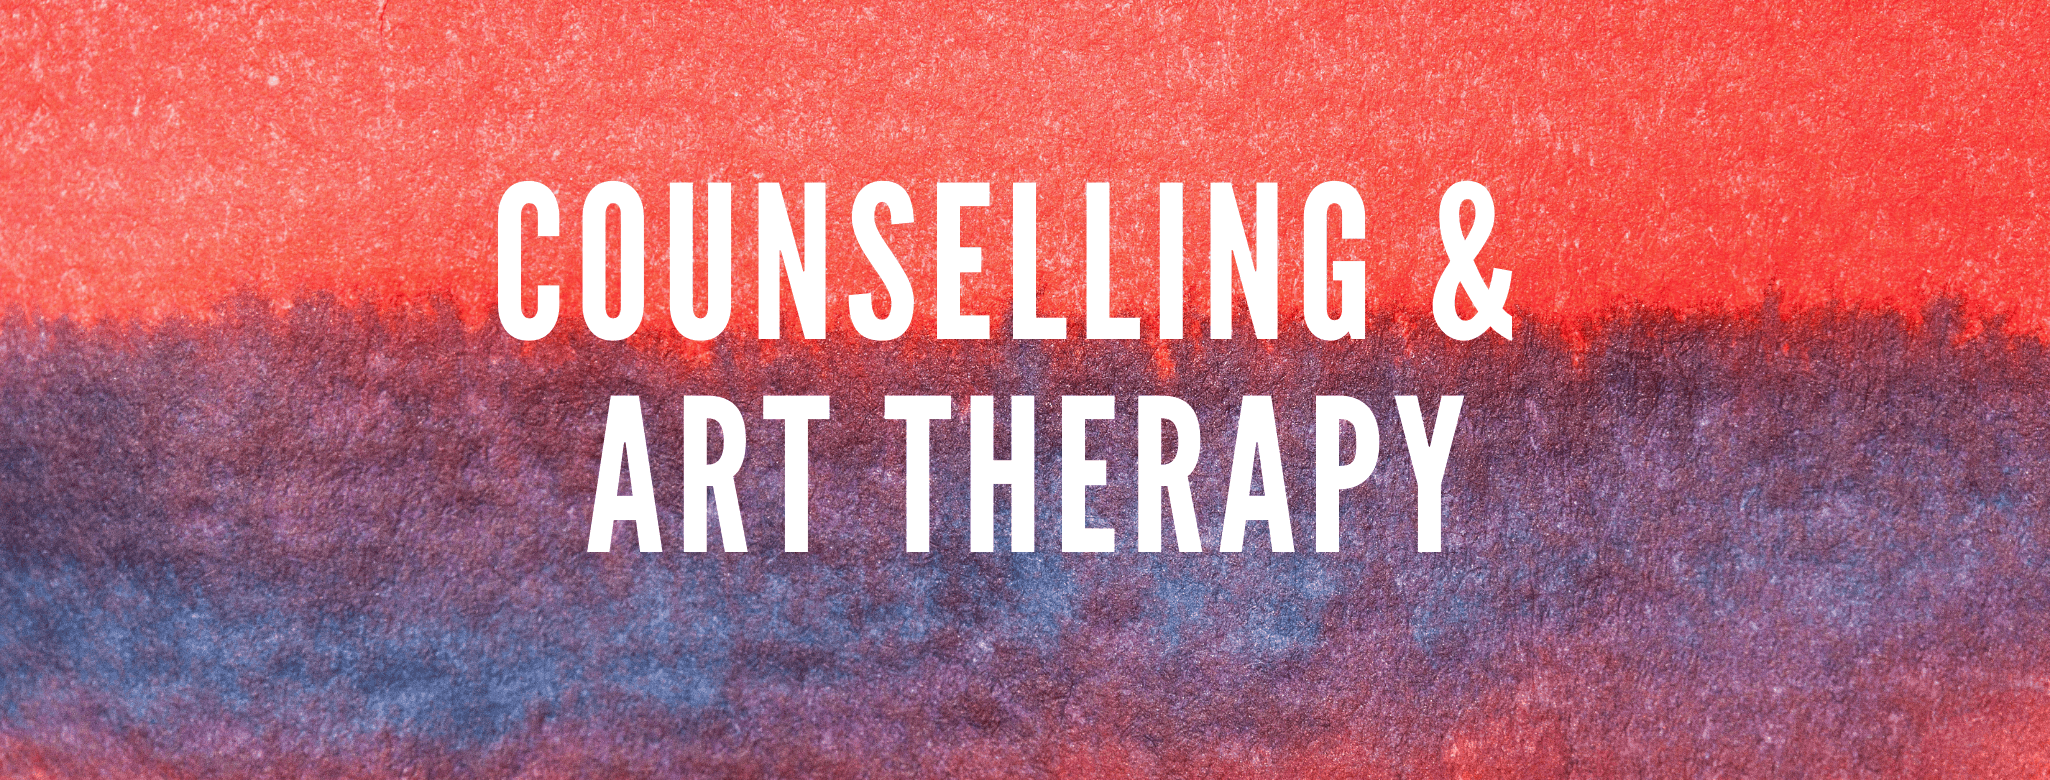 counselling and art therapy